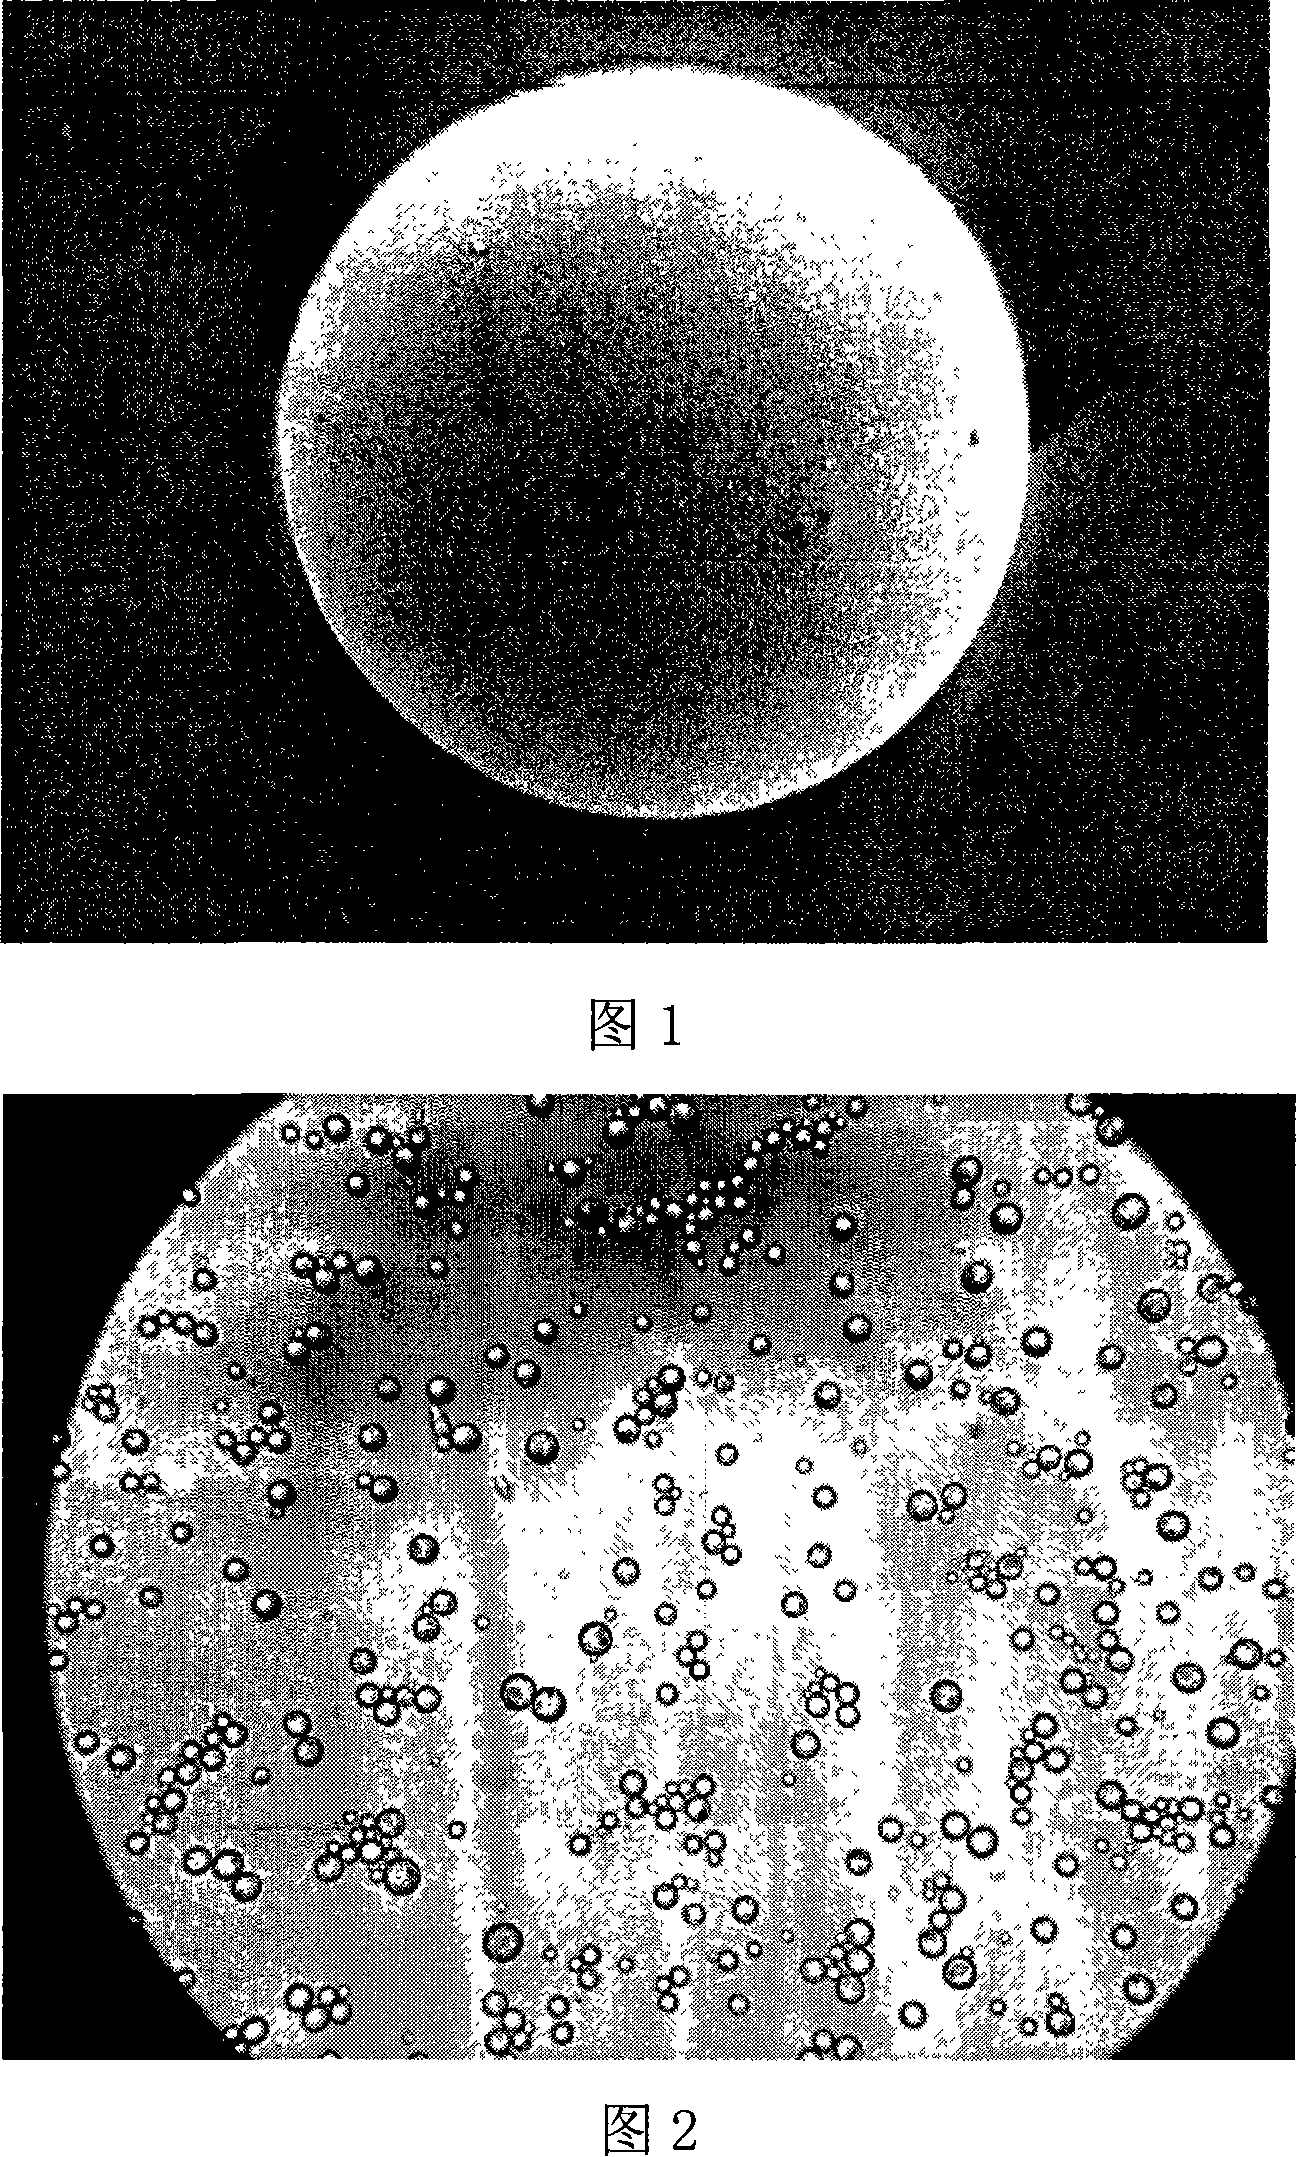 Method of manufacturing fulvestrant sustained-release microspheres